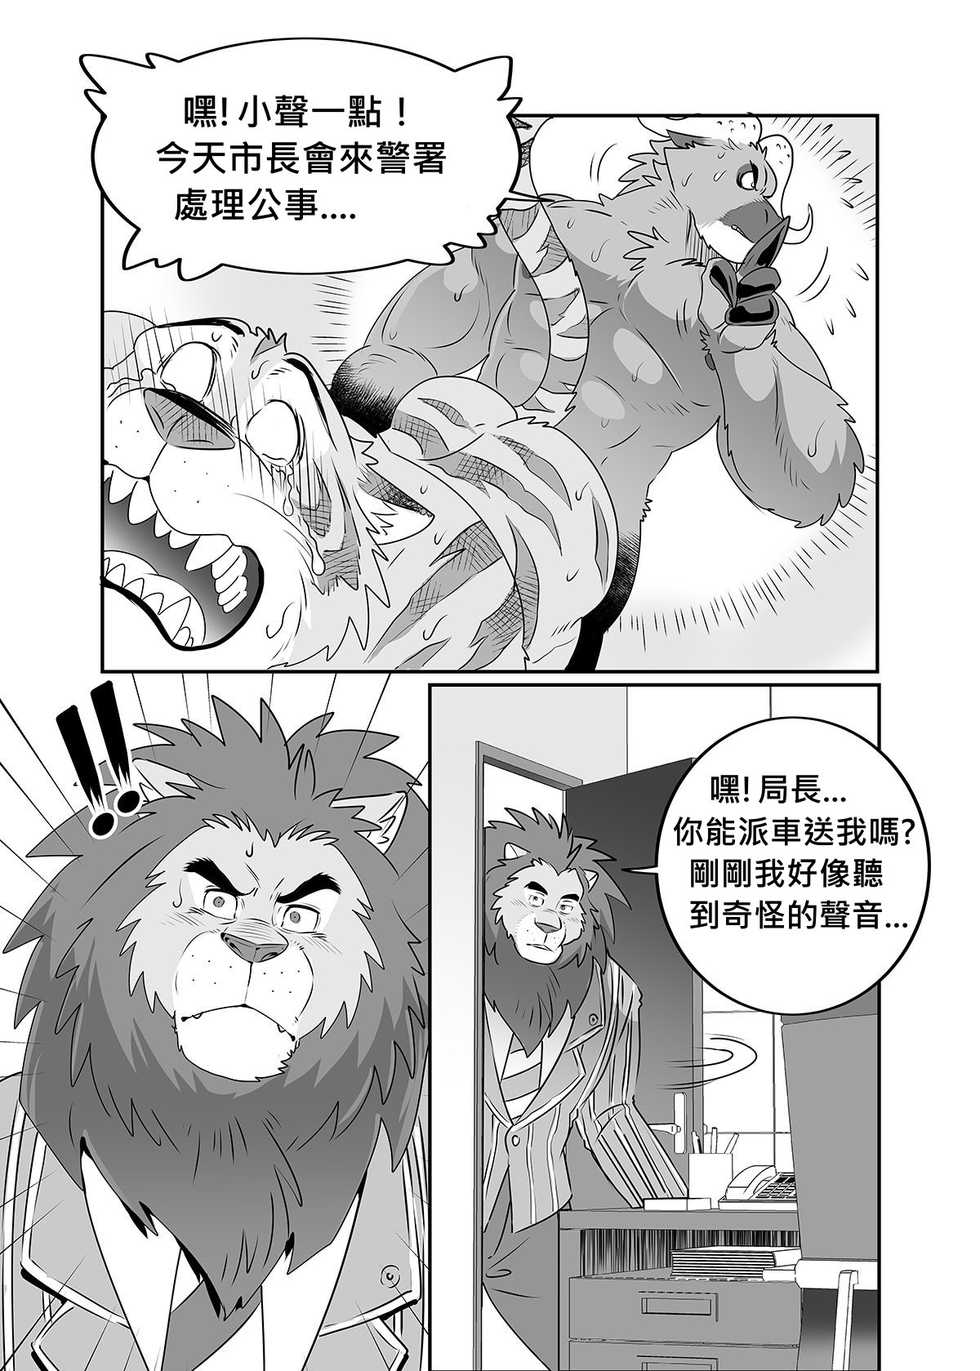 [Kuma Hachi] chief bogo found a dirty police (fixed version) [Chinese] - Page 16